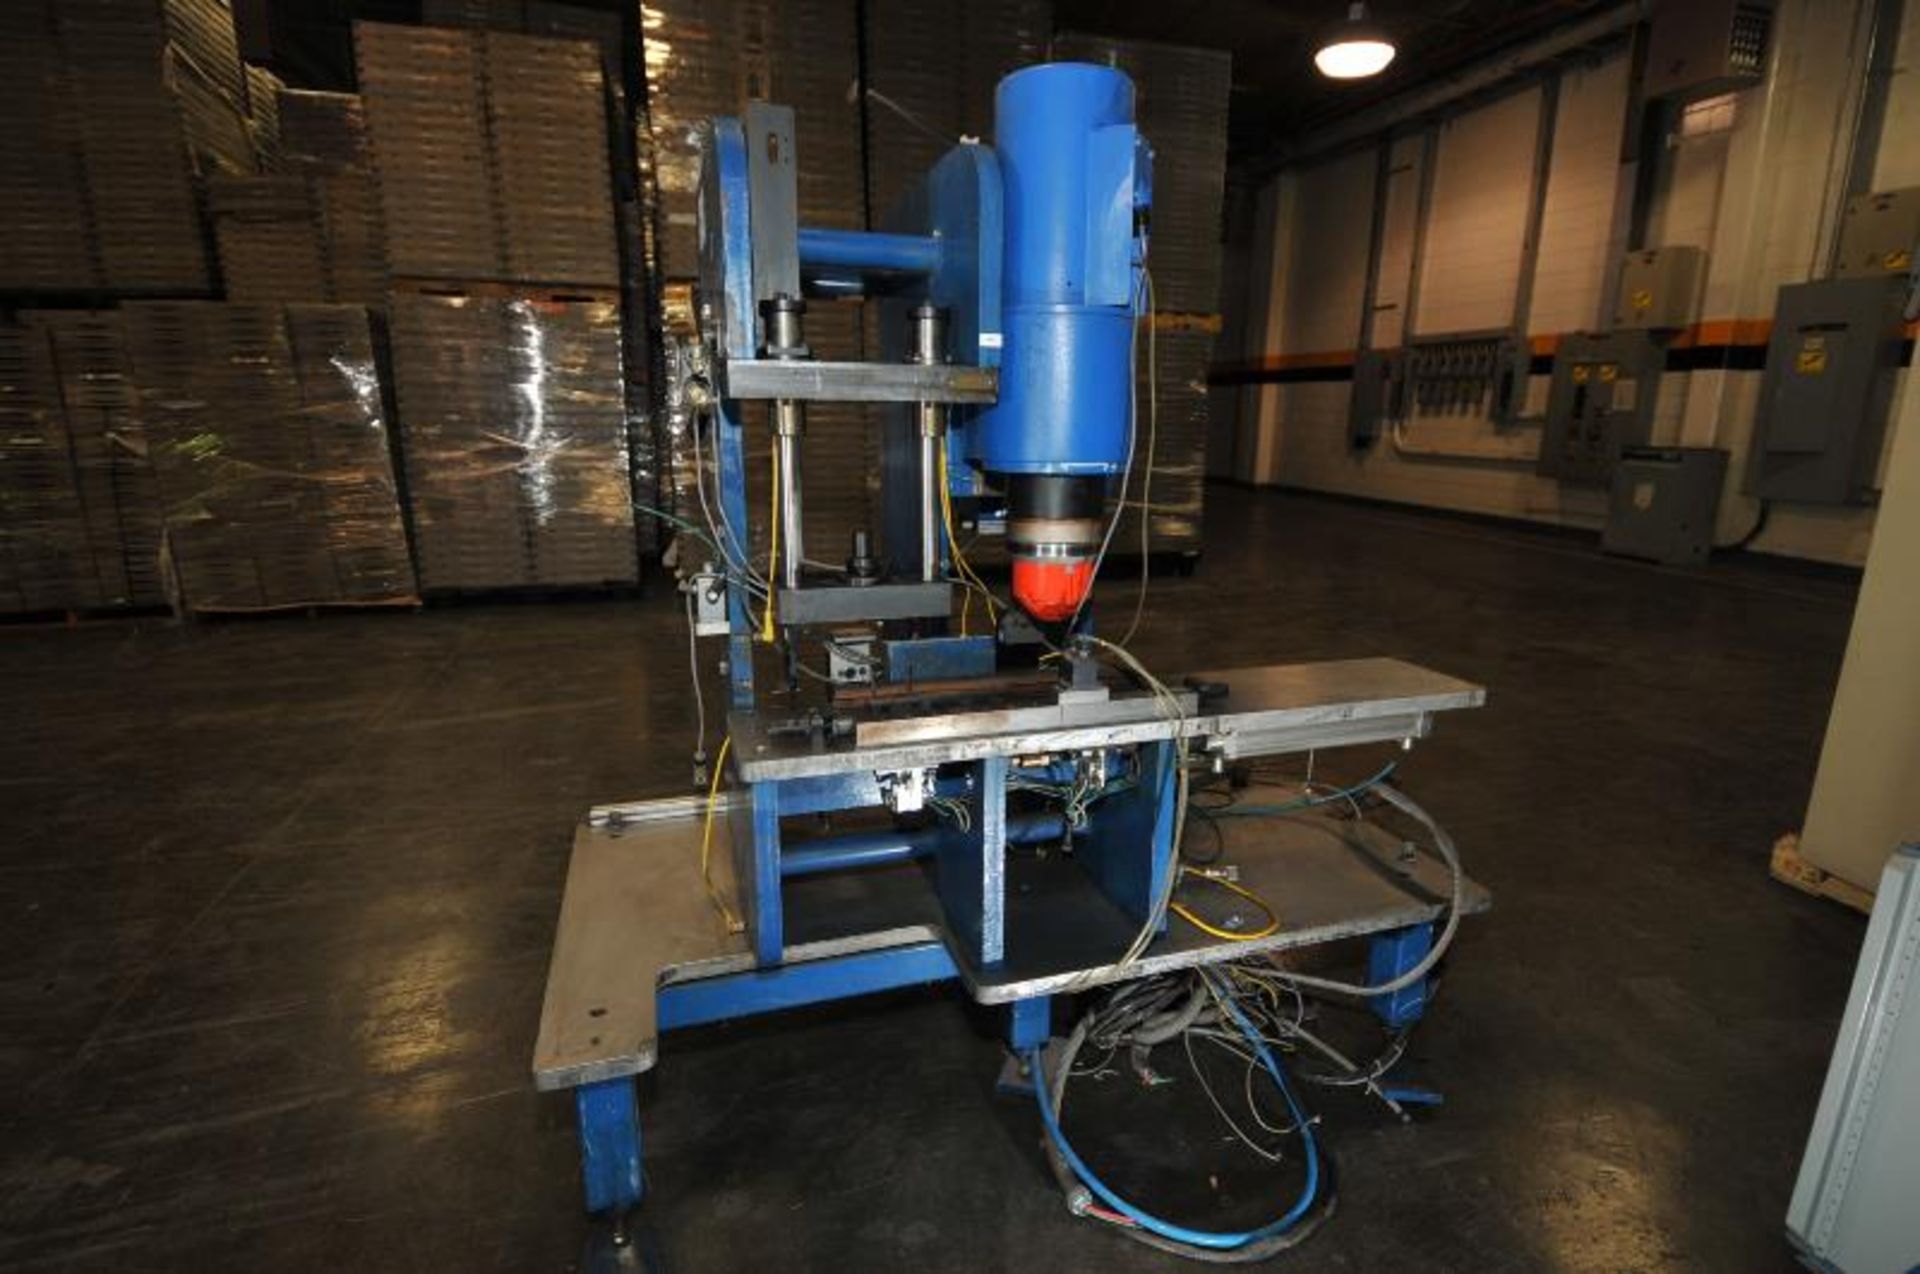 workstation for Industrial Riveter, brand: inovative automation, condition: spare parts. Location: - Image 3 of 11